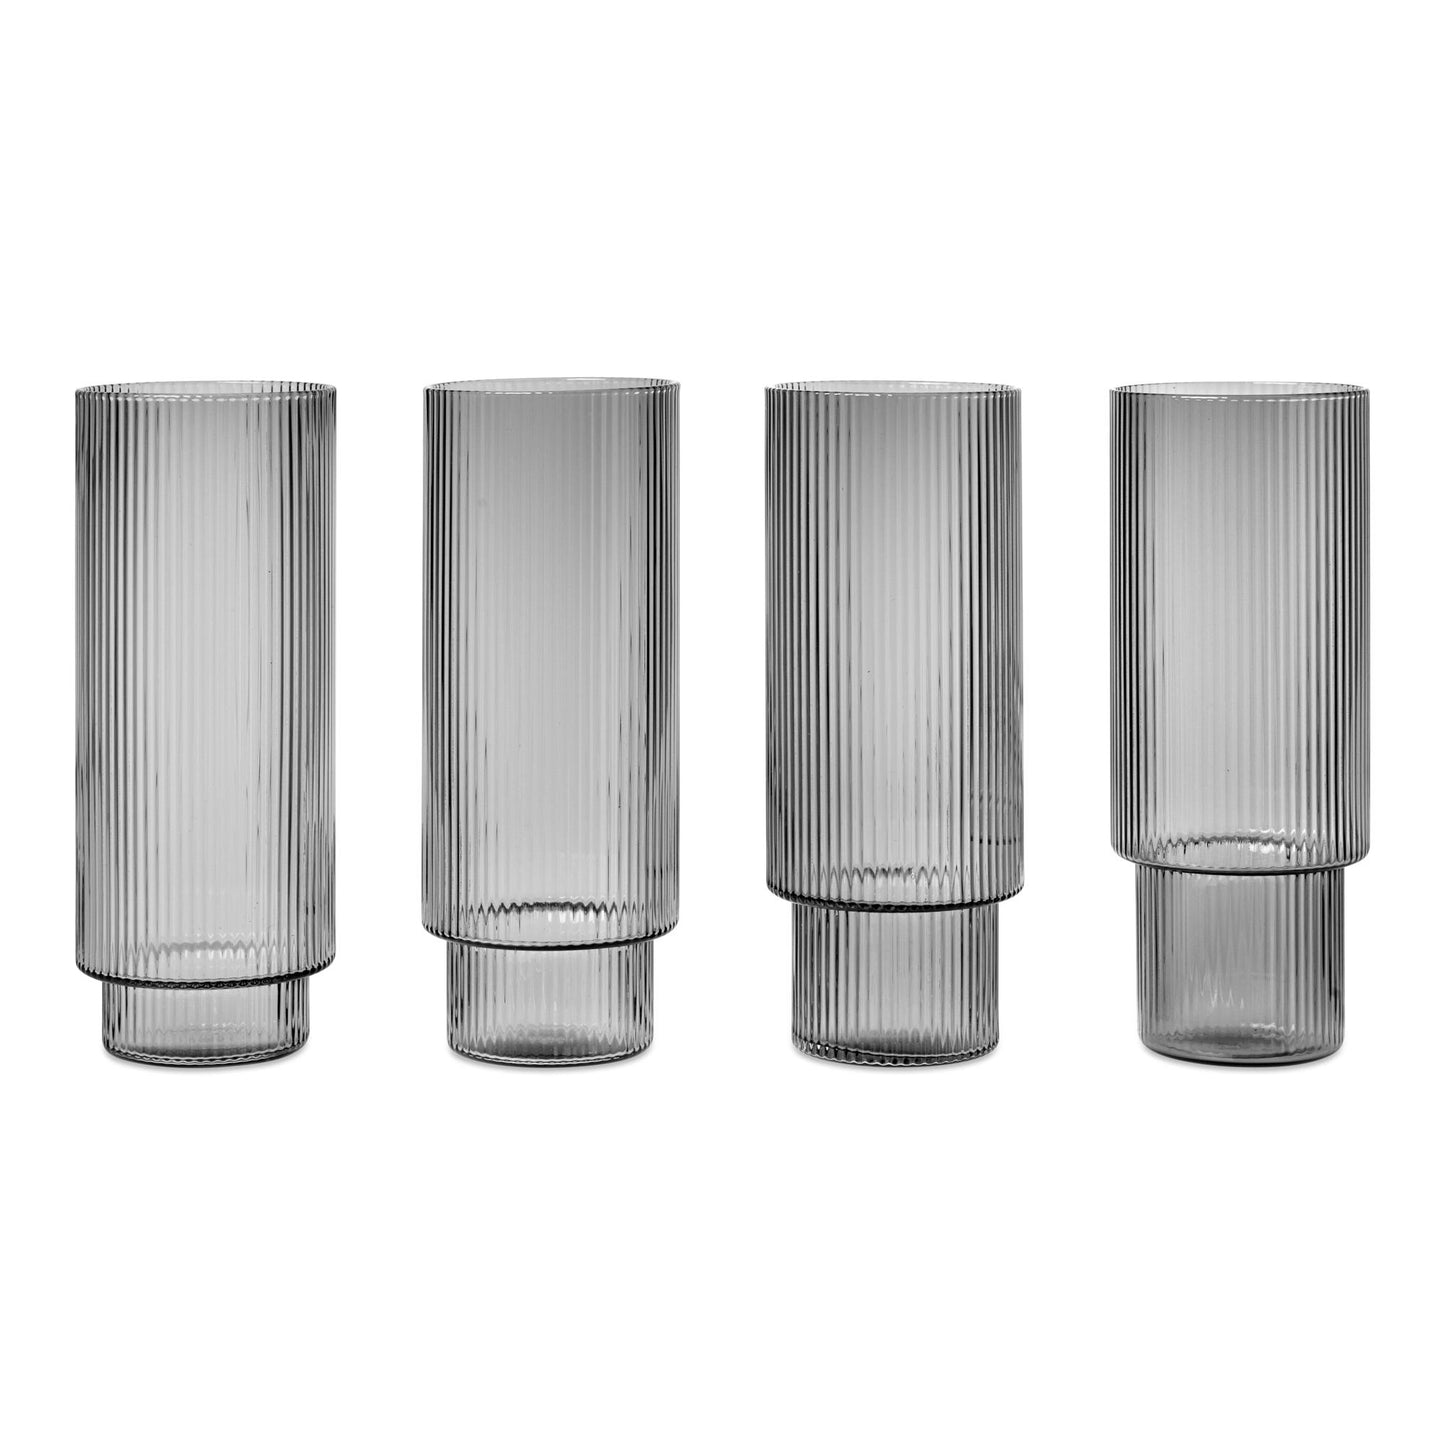 Ripple Long Drinking Glass Set of 4 by Ferm Living #Smoked